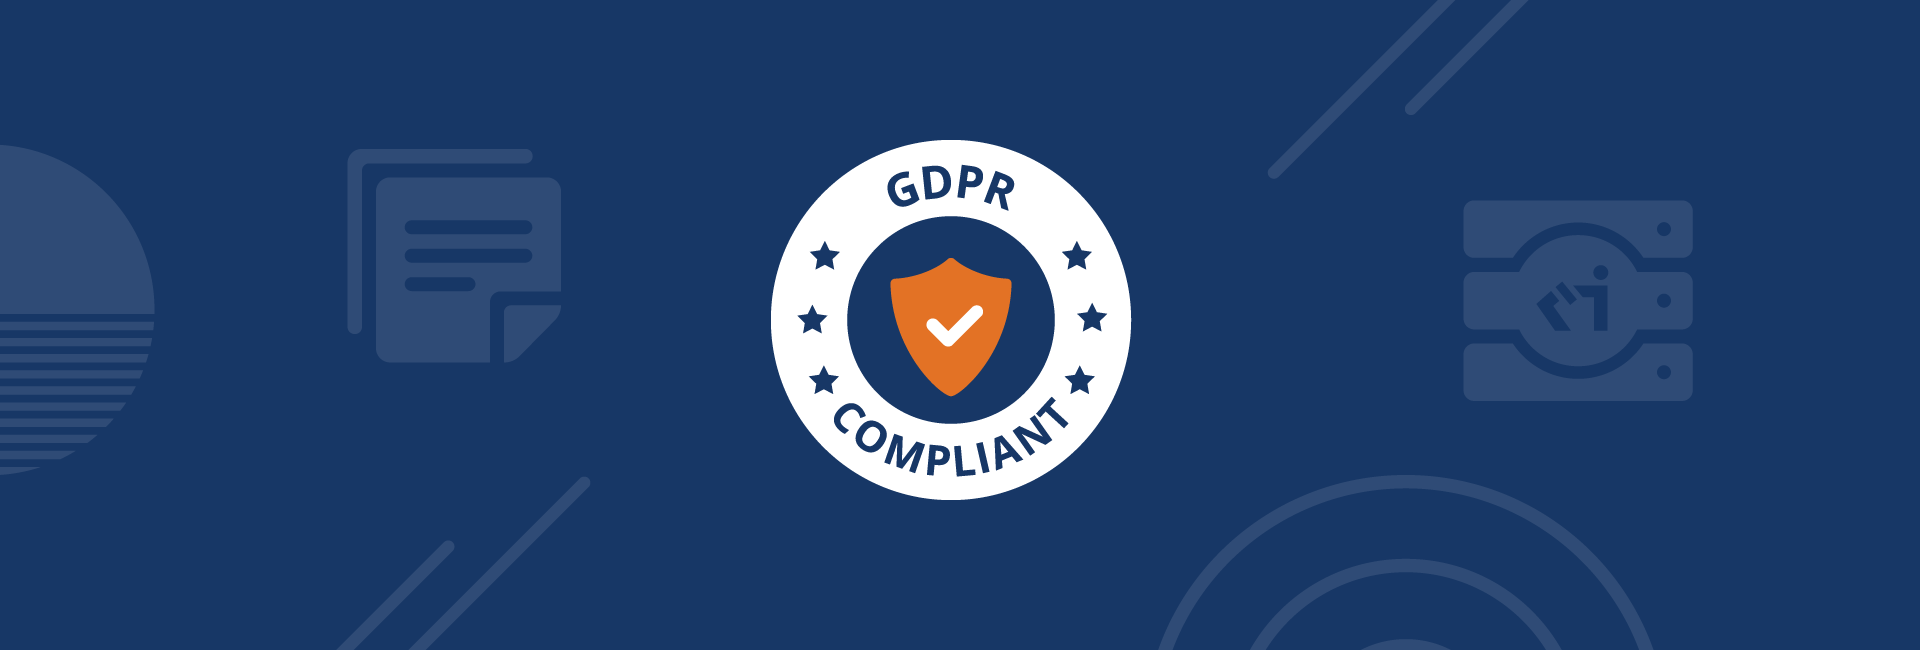 SiteKiosk Online is and remains GDPR compliant